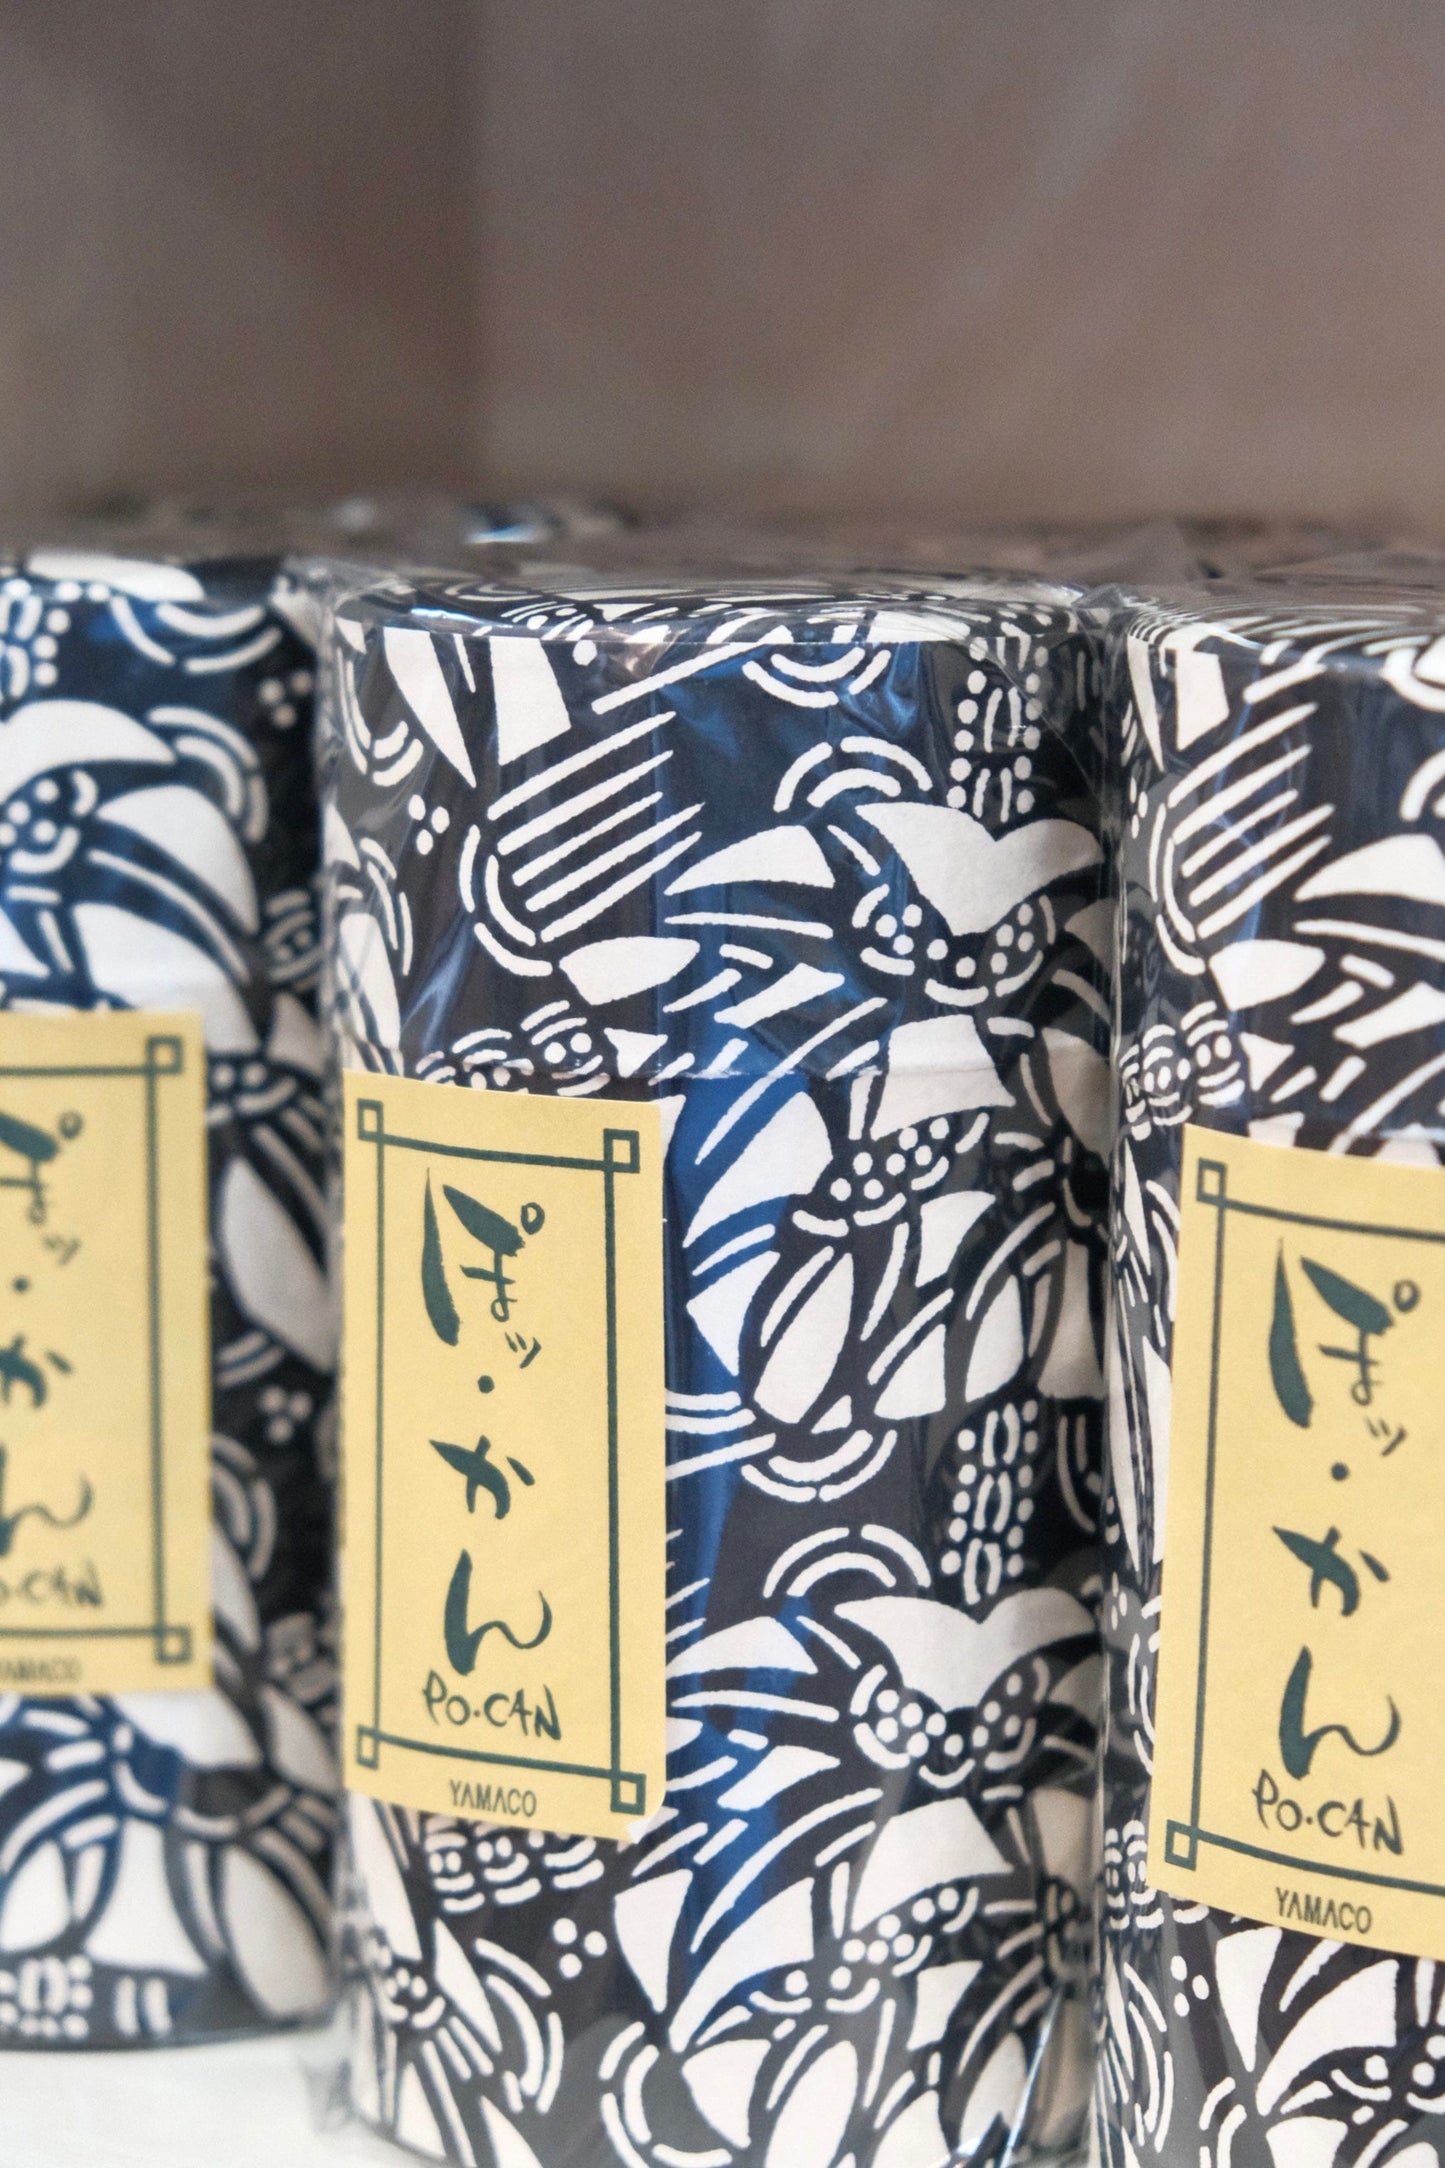 Japan Made Japanese Pattern Tea Canister